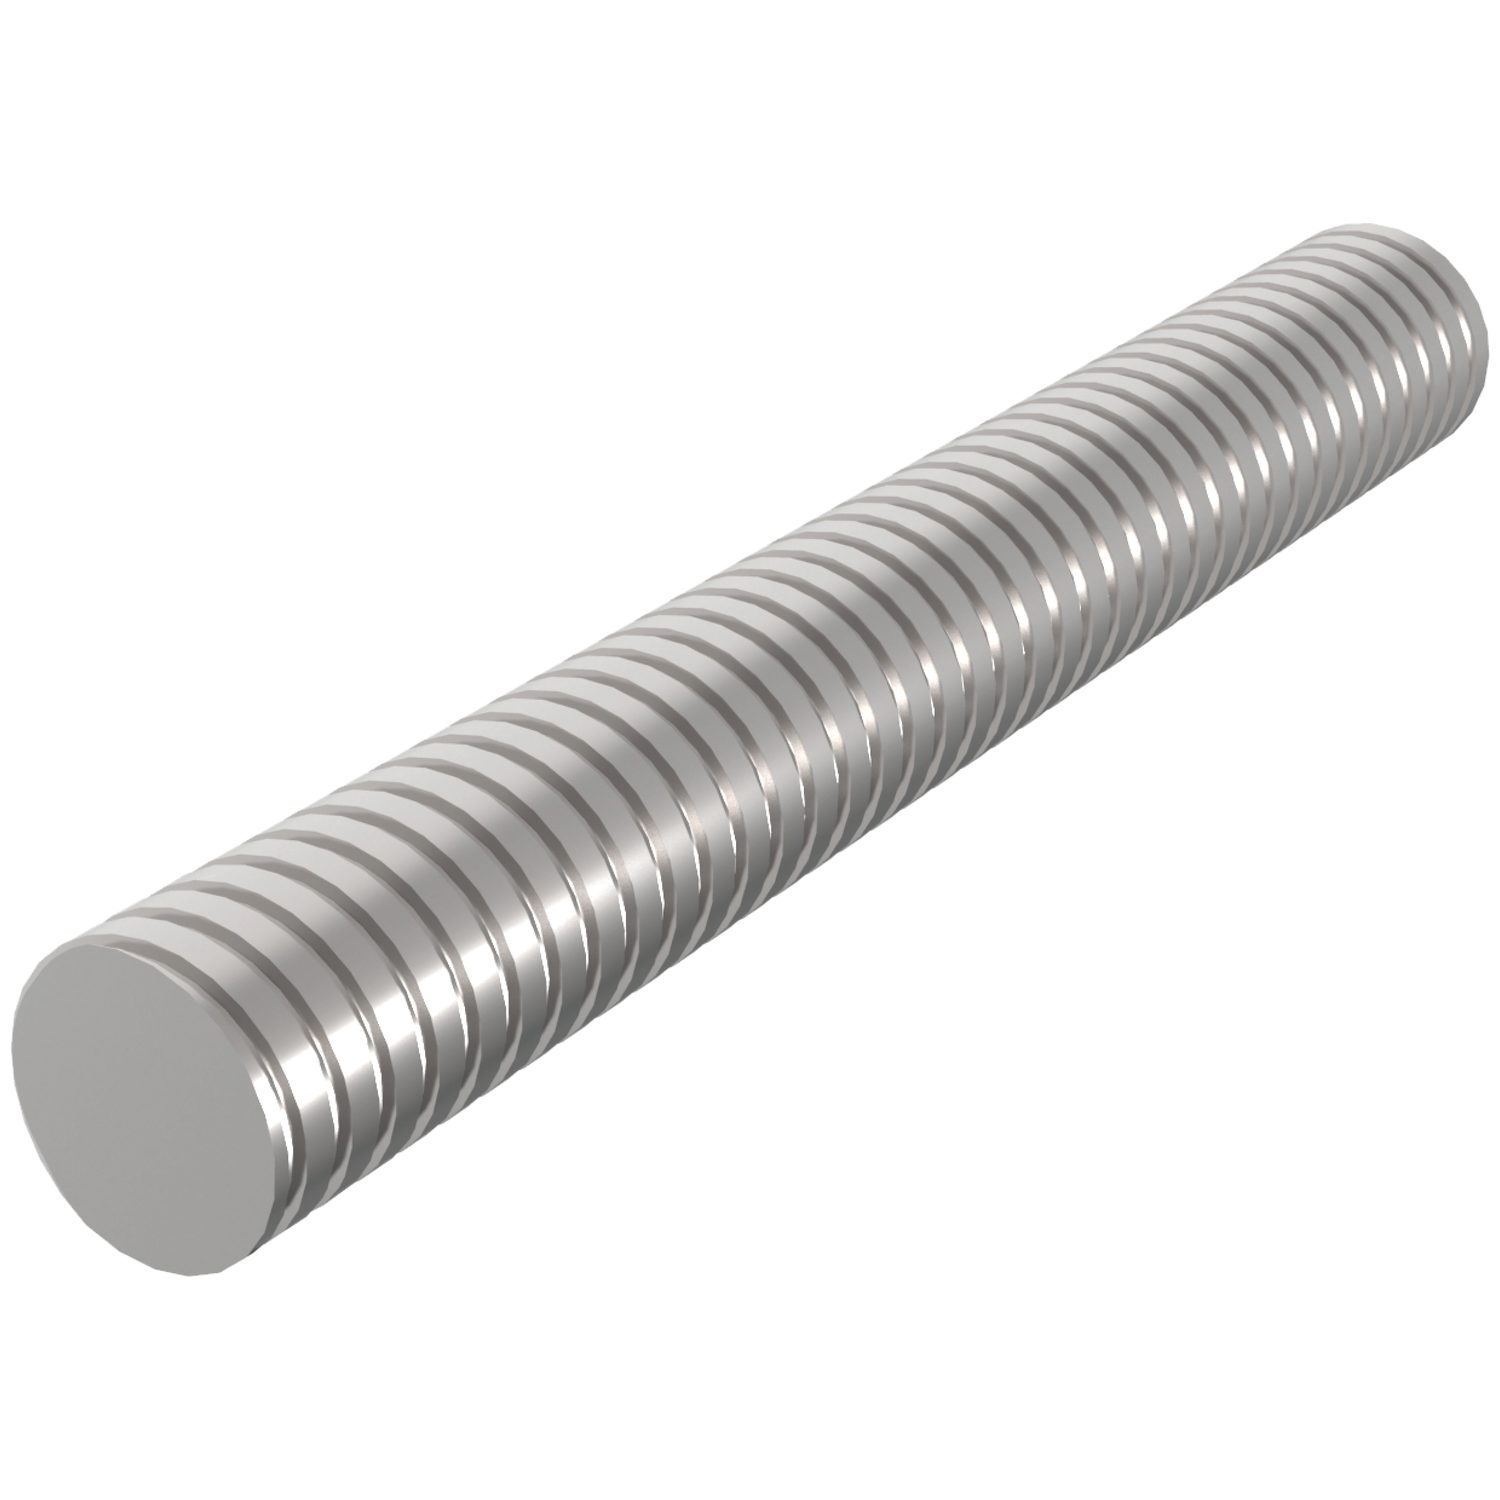 Steel Lead Screws Rolled trapezoidal C45 steel lead screws, left hand thread. Lengths of up to 6 meters can be provided. Tr10 to Tr 120.